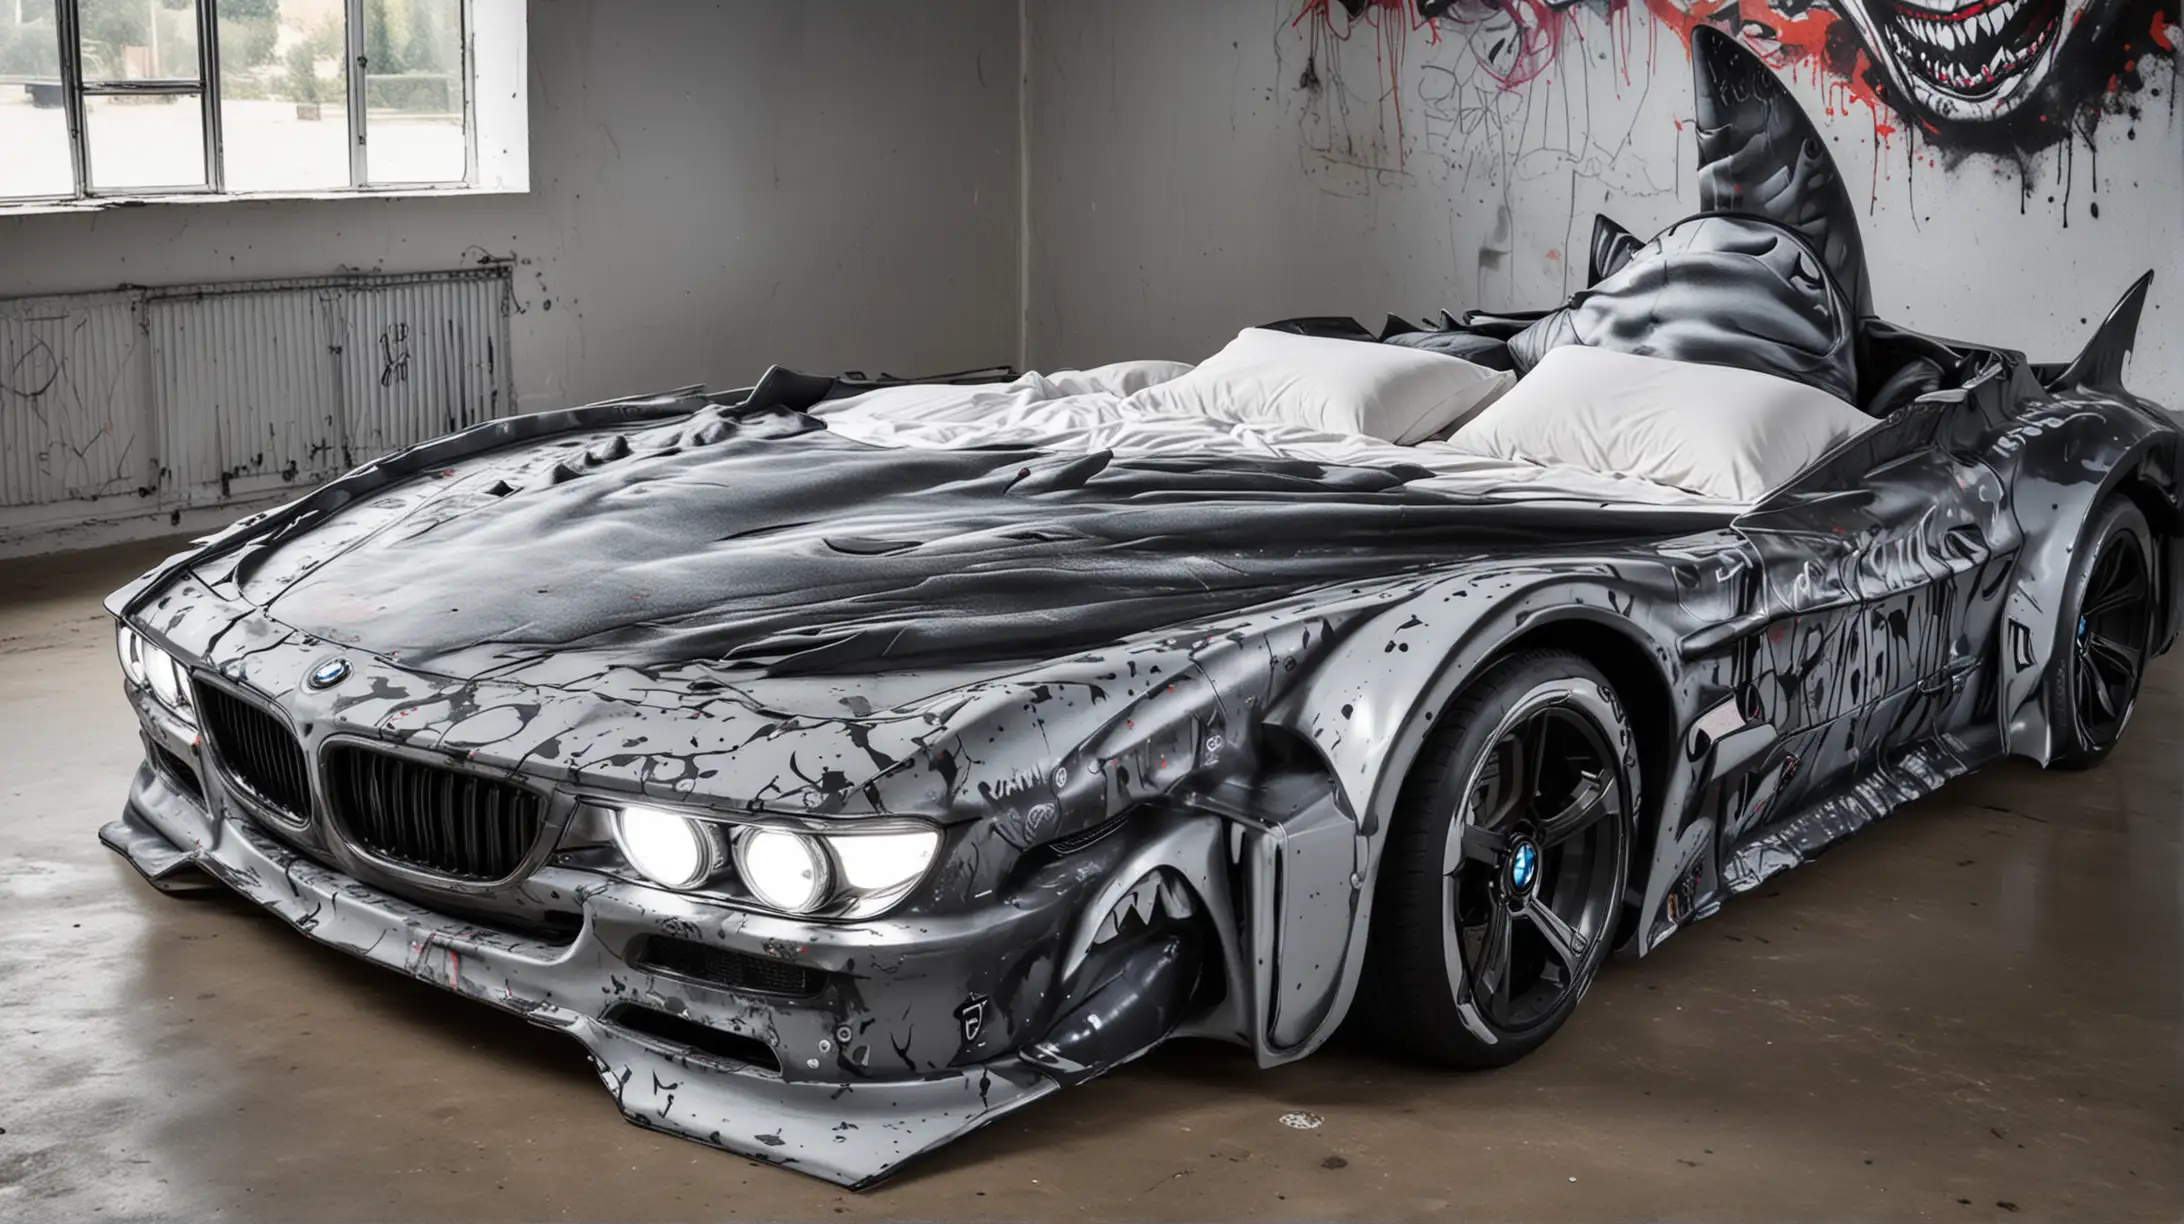 BMW CarShaped Double Bed with Evil Shark Graffiti